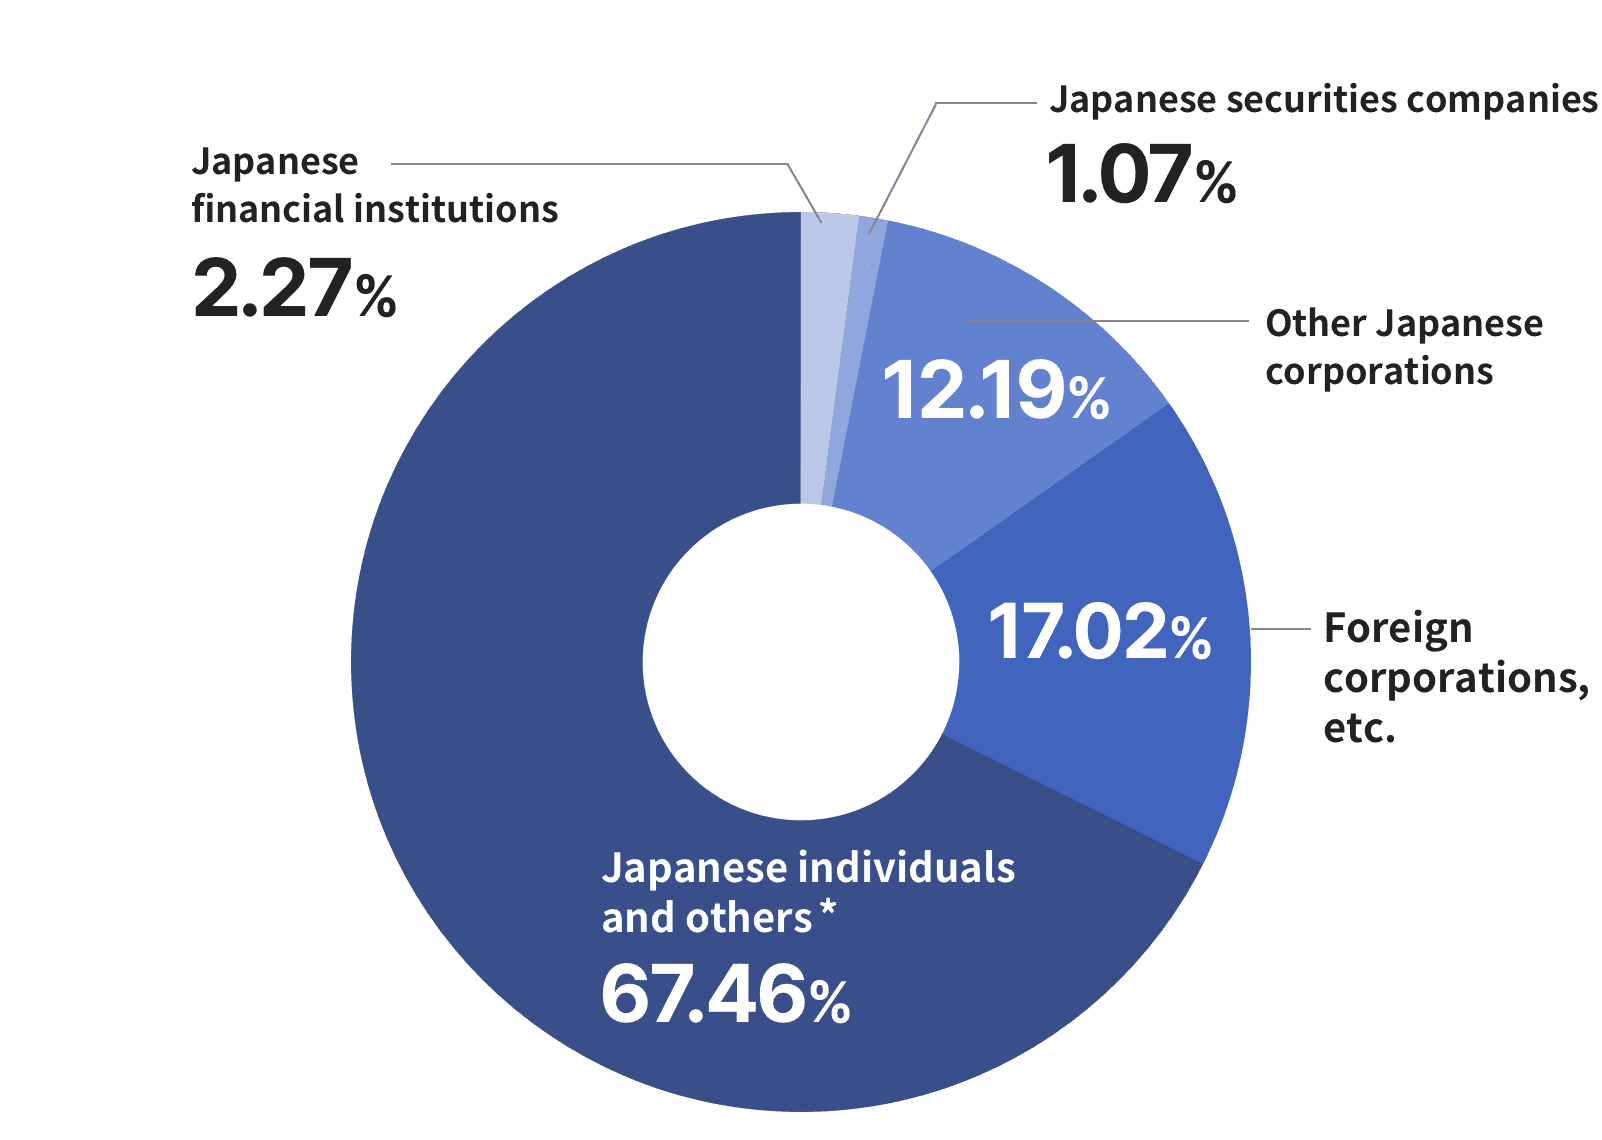 Distribution of ownership among shareholders(graph). Japanese financial instituitons 2.27%, Japanese securities companies 1.07%, Other Japanese corporations 12.19%, Foreign corpations etc.17.02%, Japanese individuals and others* 67.46%.